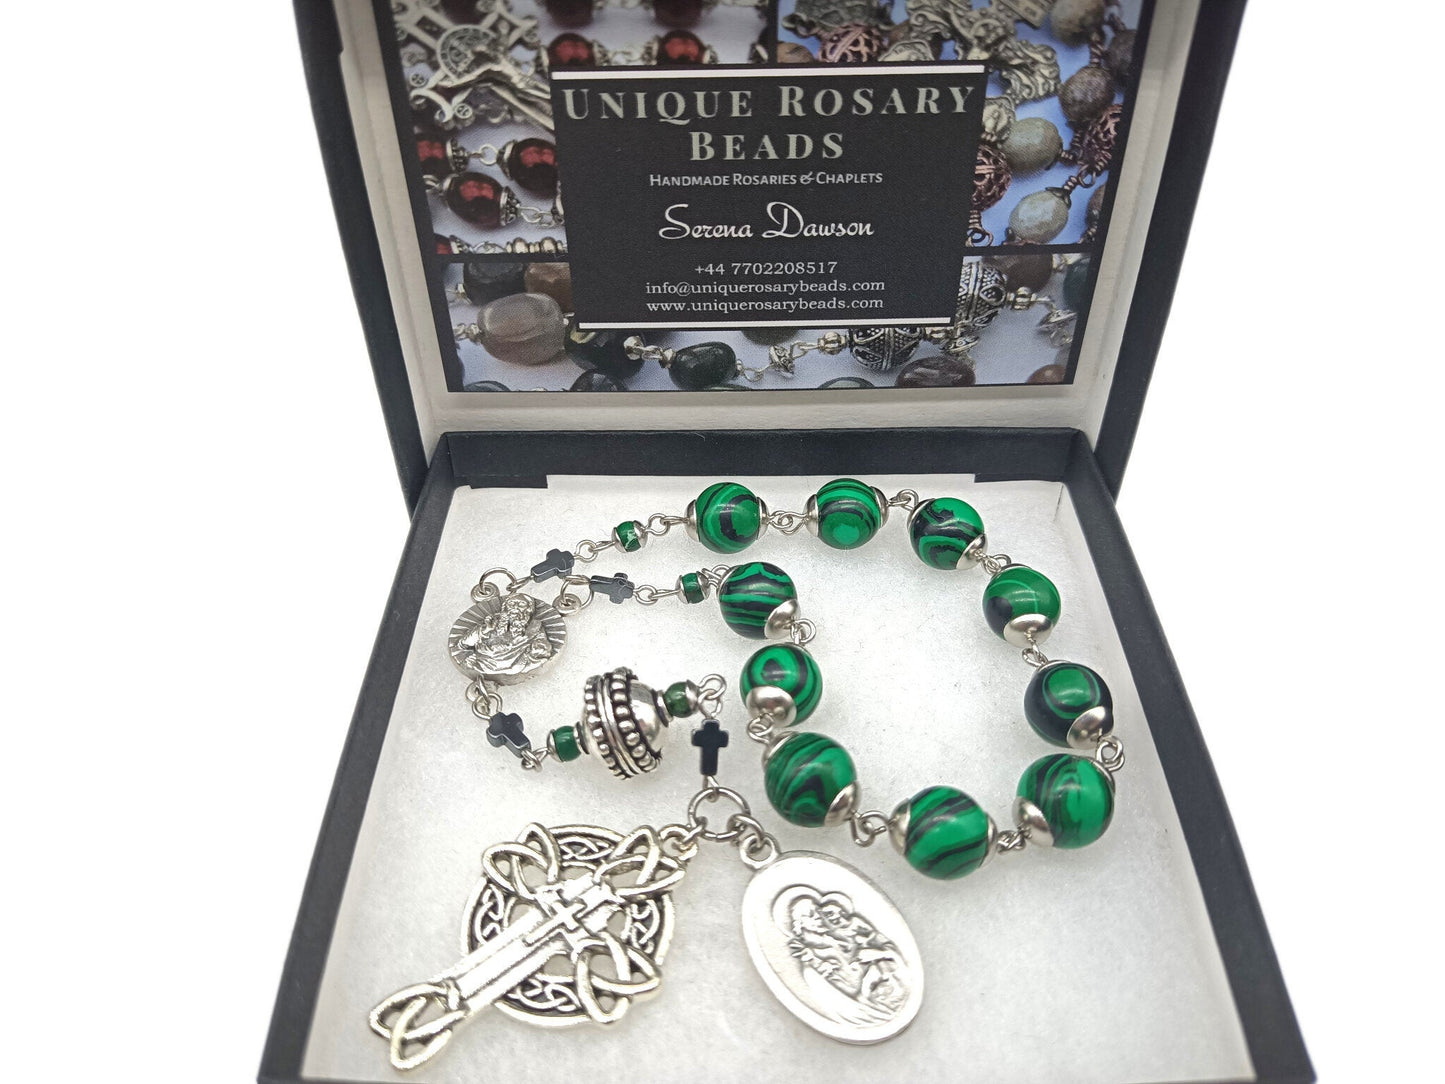 Saint Joseph unique rosary beads single decade with green gemstone beads, silver crucifix and St. Joseph medals.